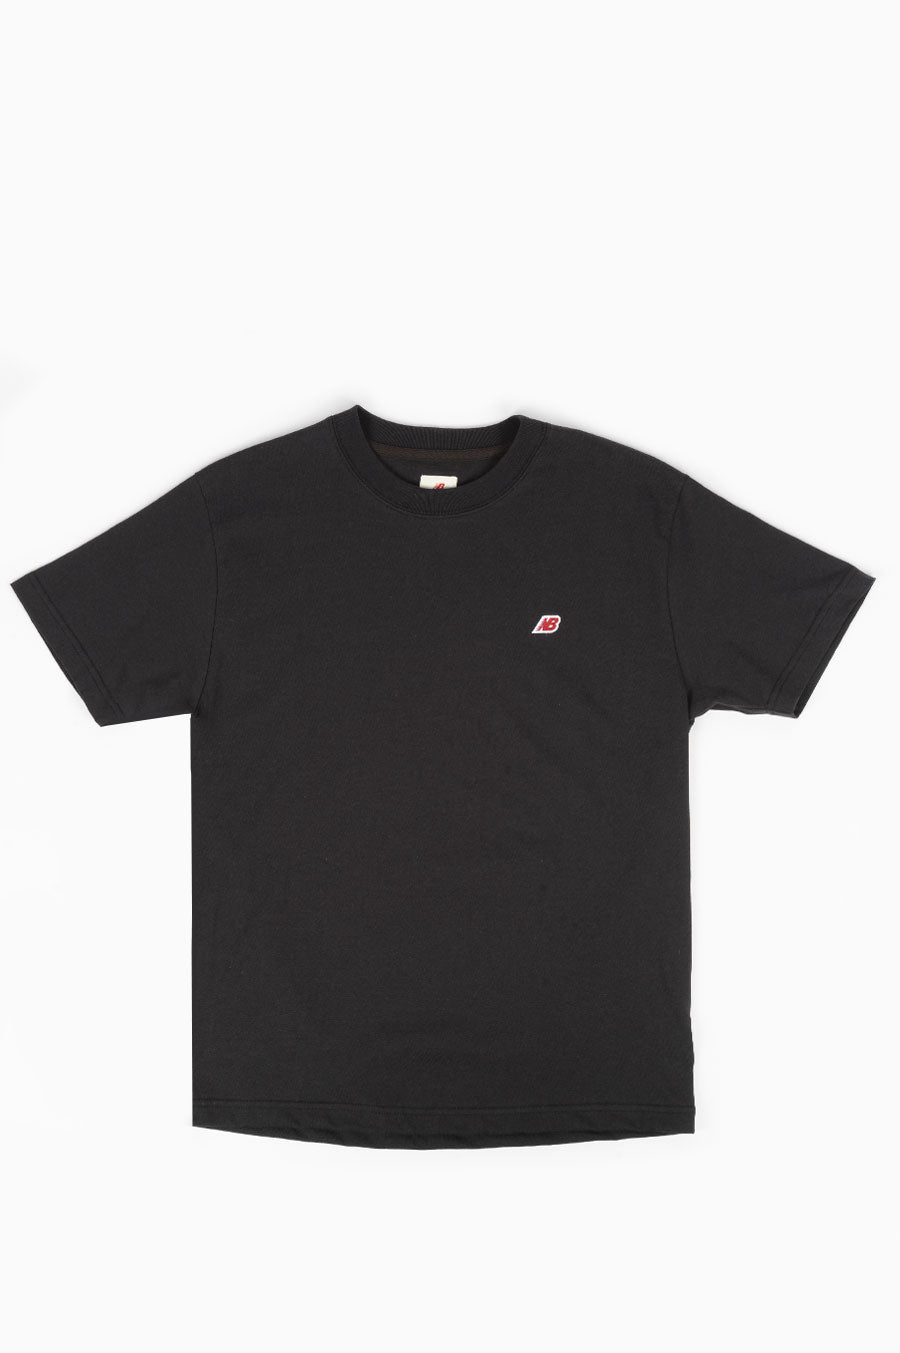 USA BALANCE – BLENDS SS MADE NEW TEE IN BLACK